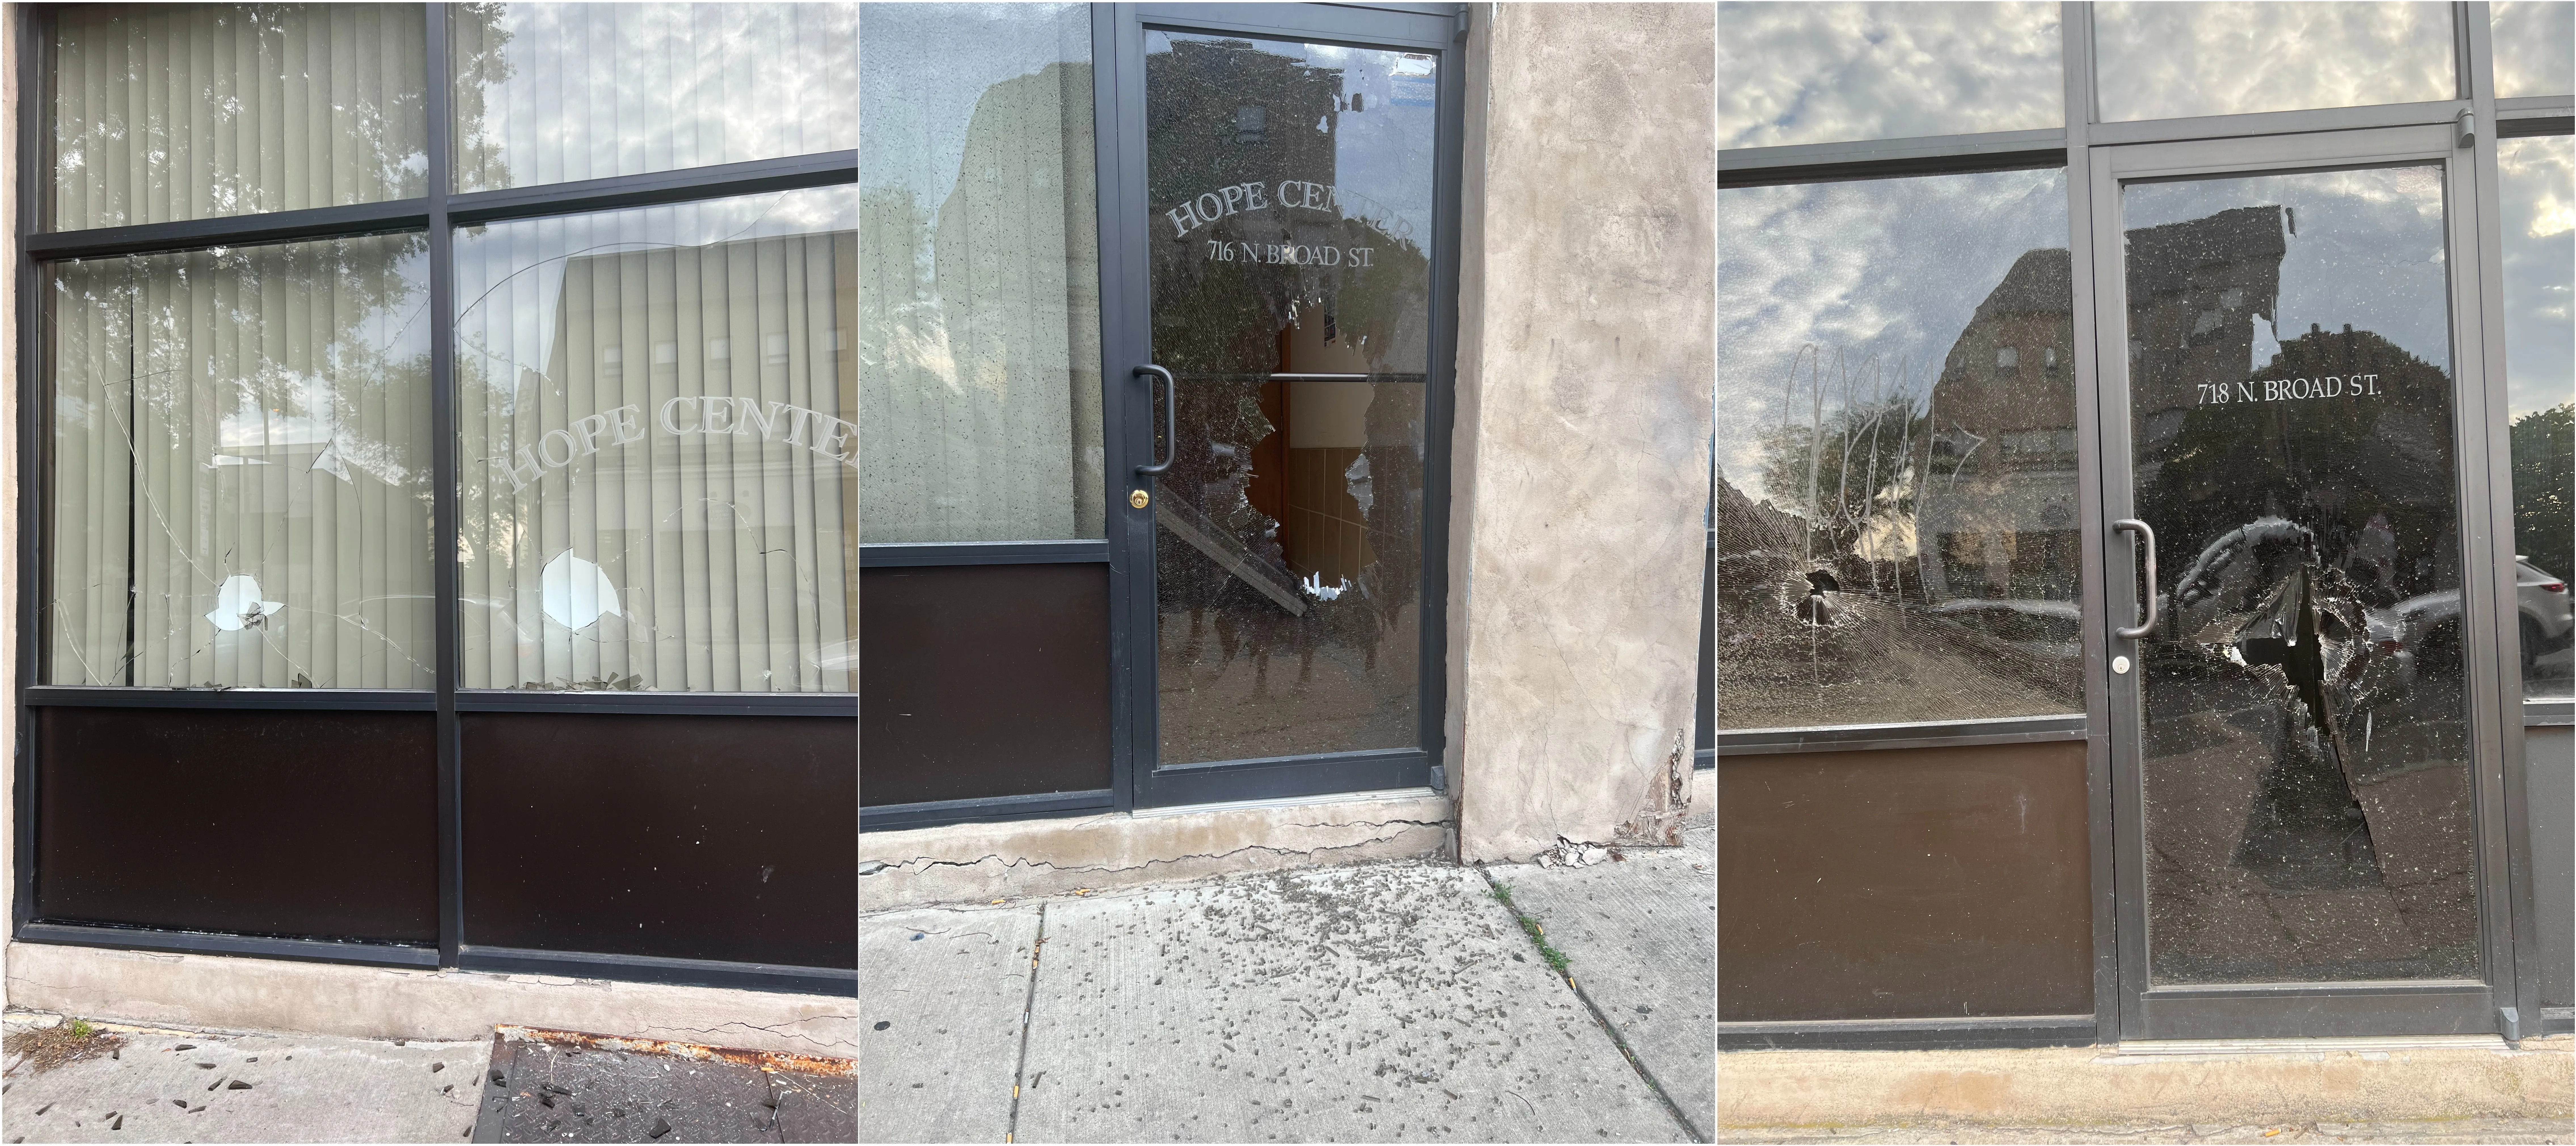 Hope Pregnancy Center in Philadelphia had four windows and three glass doors smashed sometimes between Friday, June 10 and Saturday, June 11, 2022.?w=200&h=150